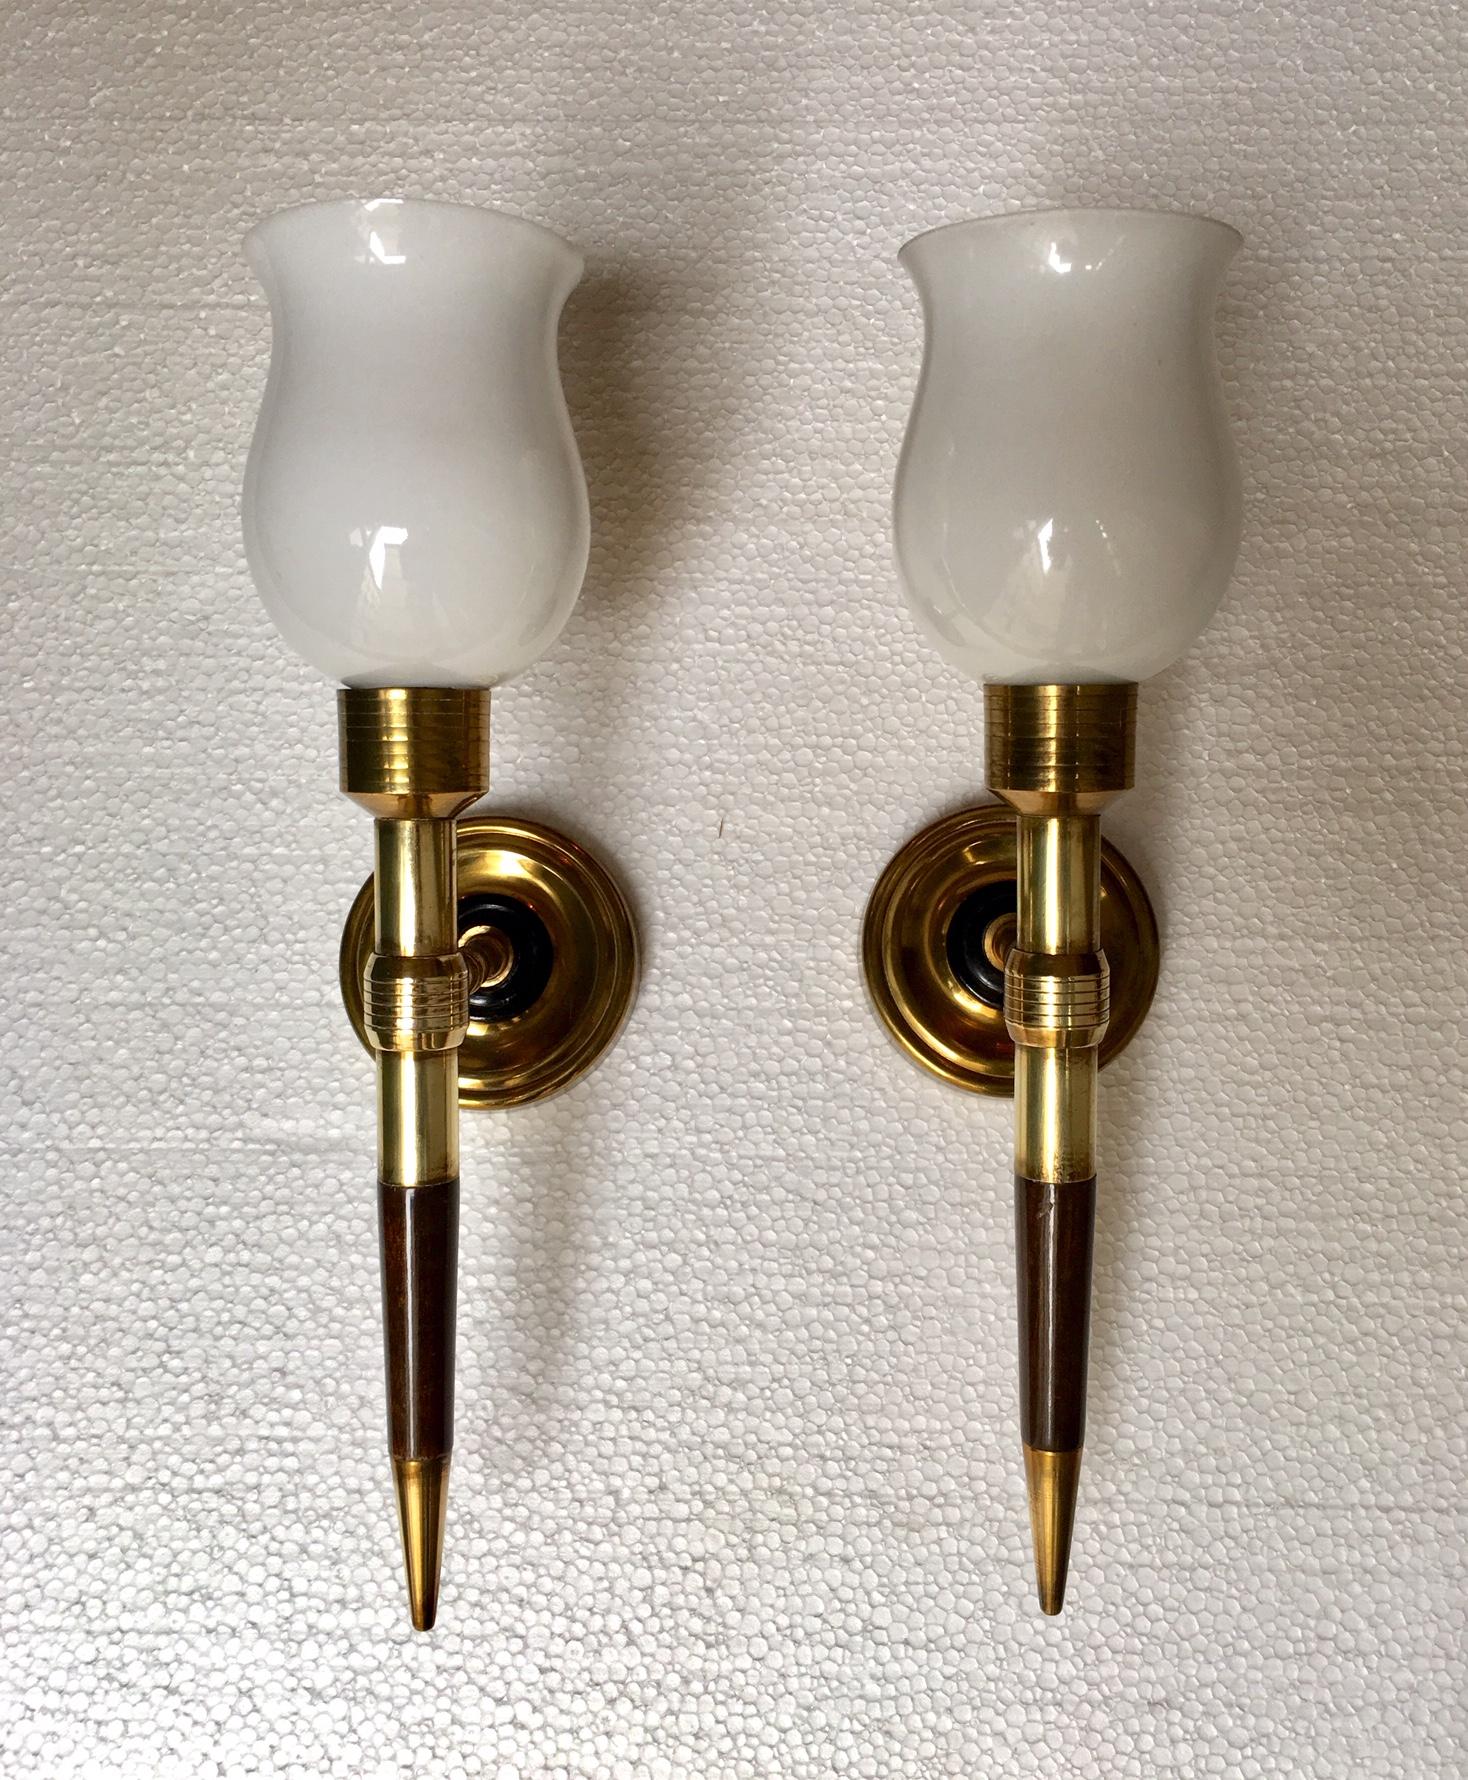 Neoclassical Revival Pair of Midcentury Neoclassical Gilt Bronze and Wood Sconces by Maison Lancel